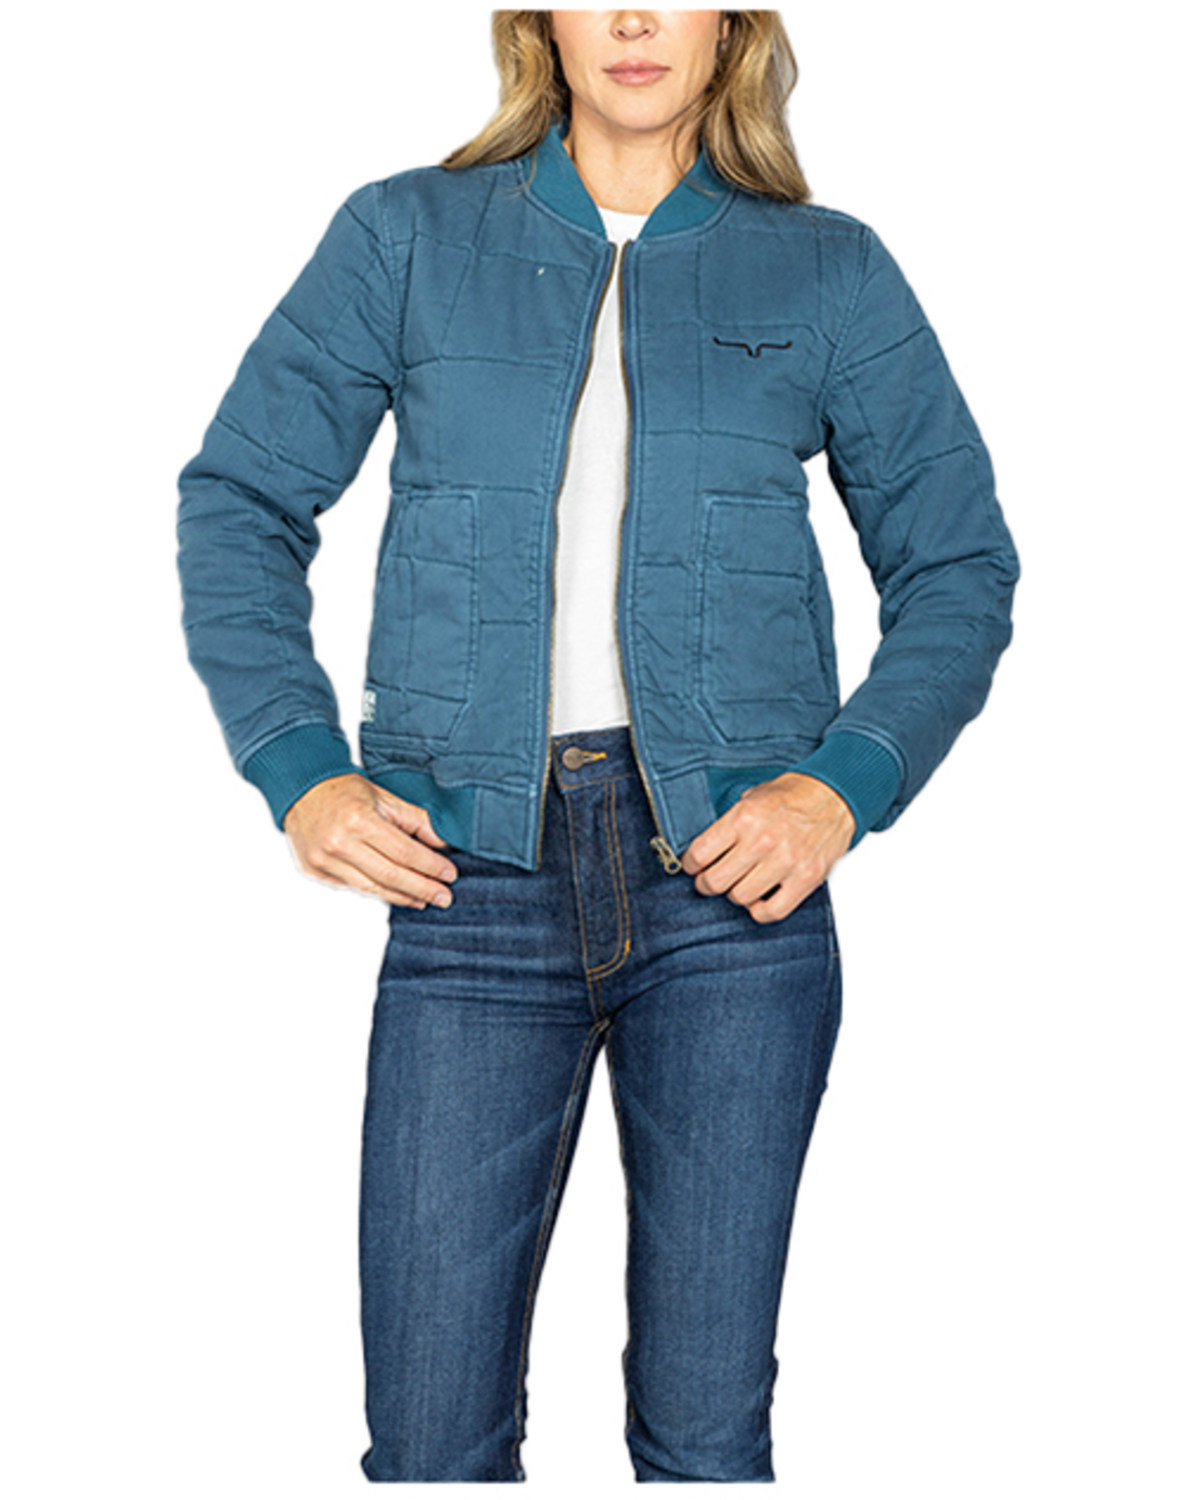 Kimes Ranch Women's Bronc Bomber Quilted Jacket